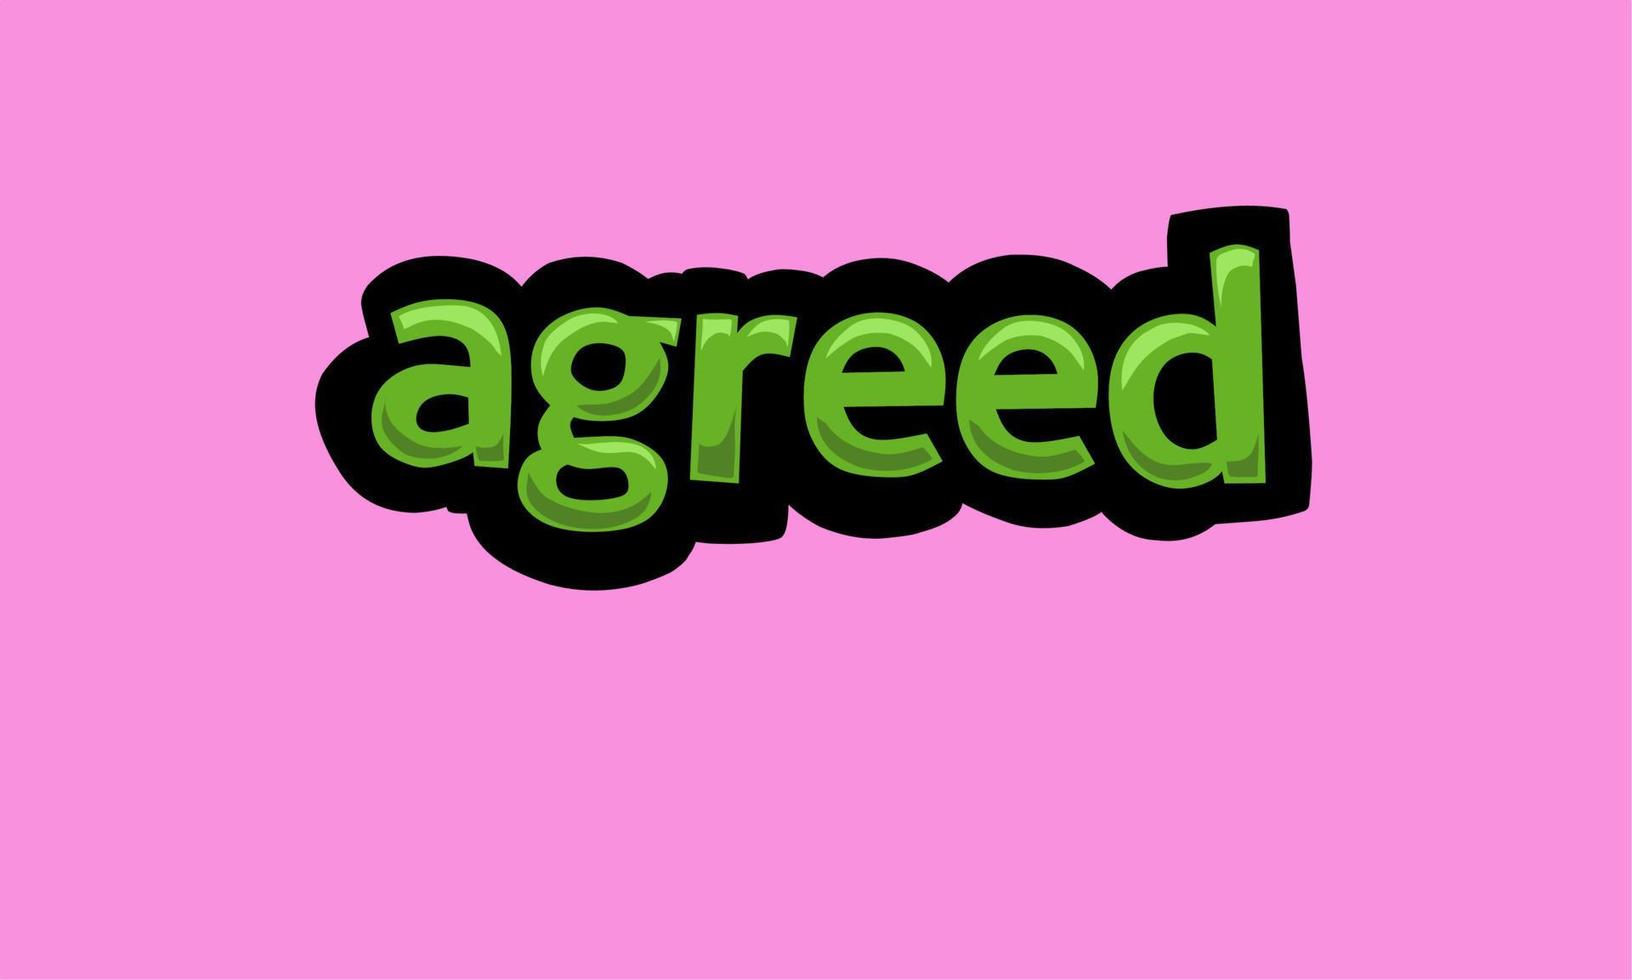 AGREED writing vector design on a pink background